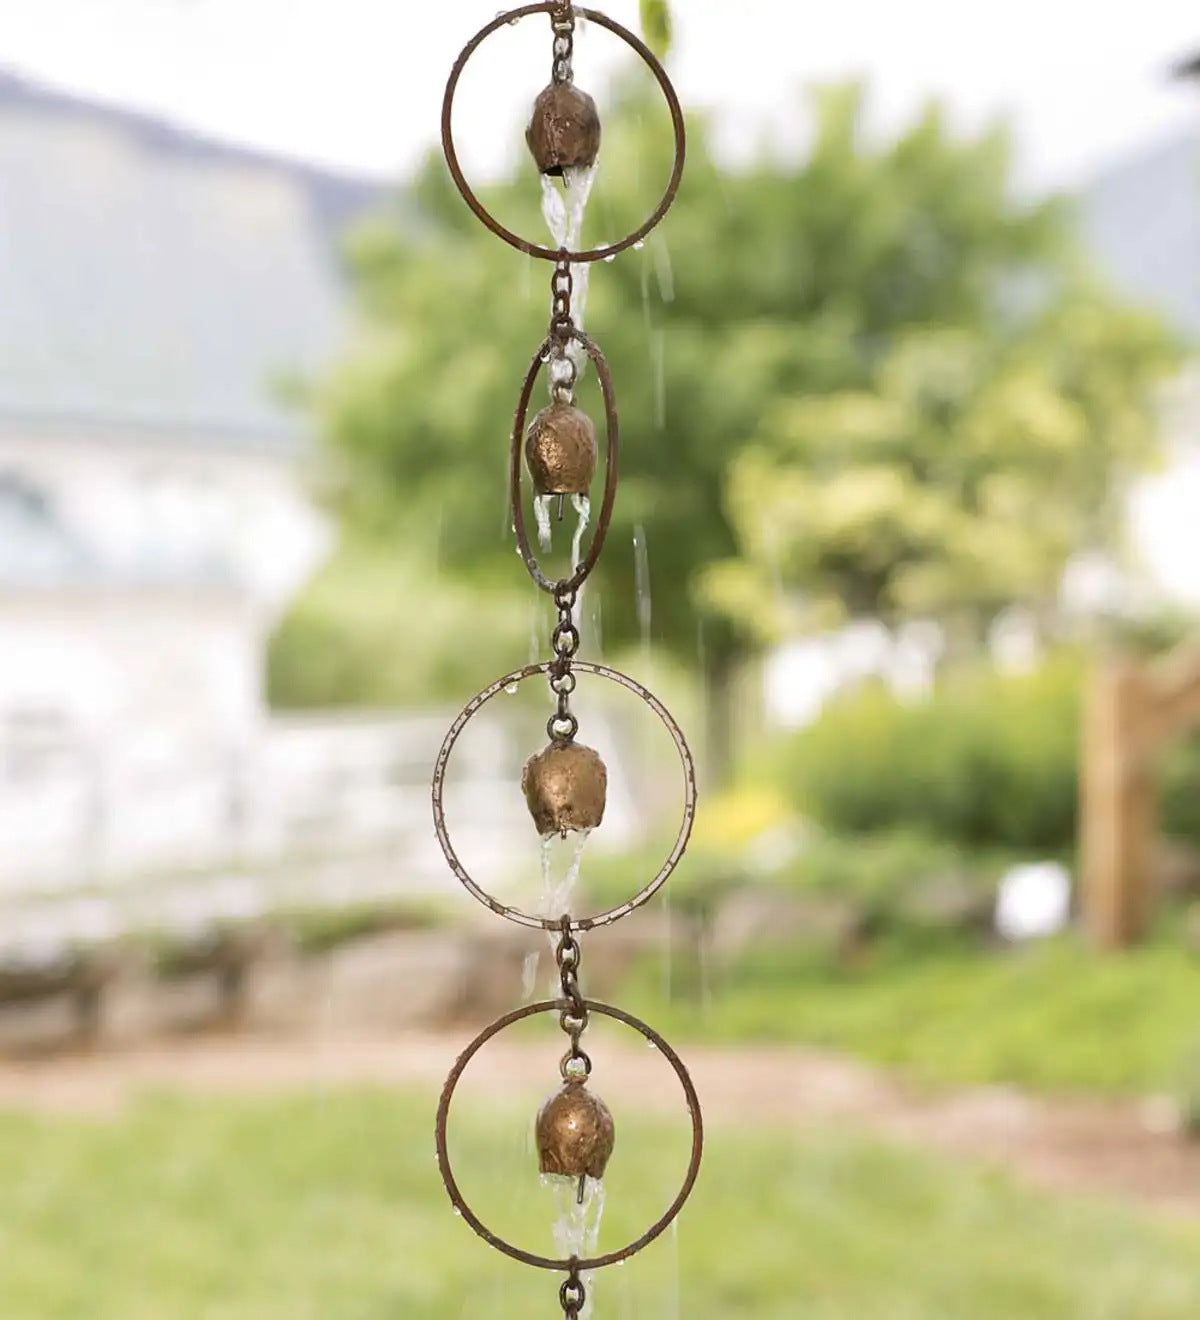 Hot Outdoor Heart-shaped Butterfly Kettle Wind Chimes Decorative Pendant